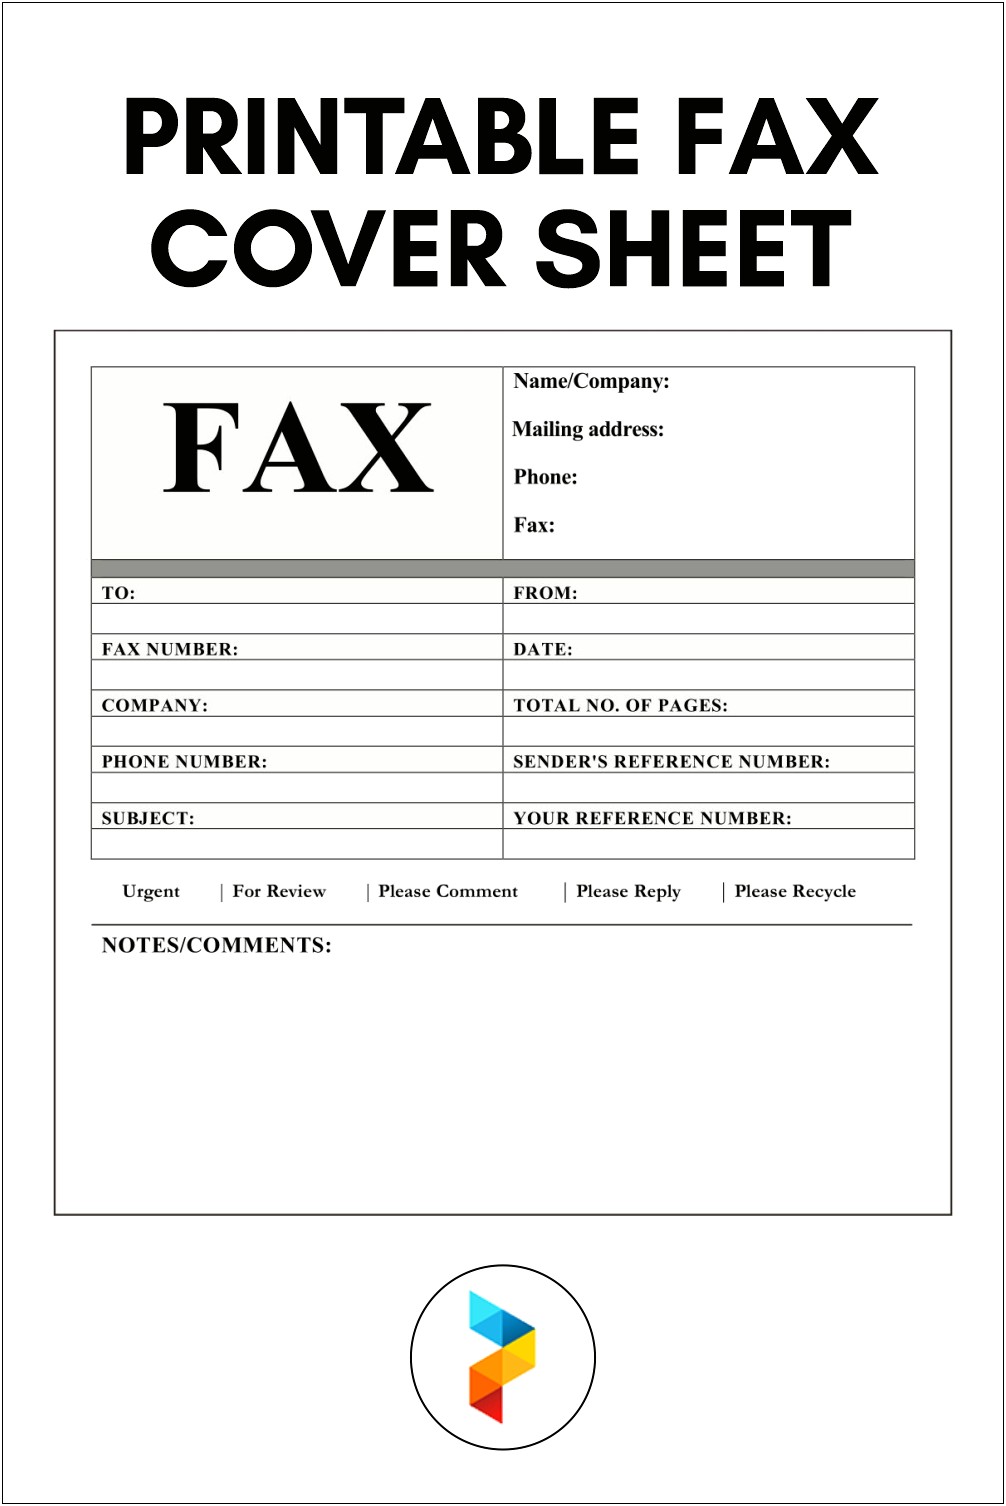 Basic Fax Cover Sheet Template Word